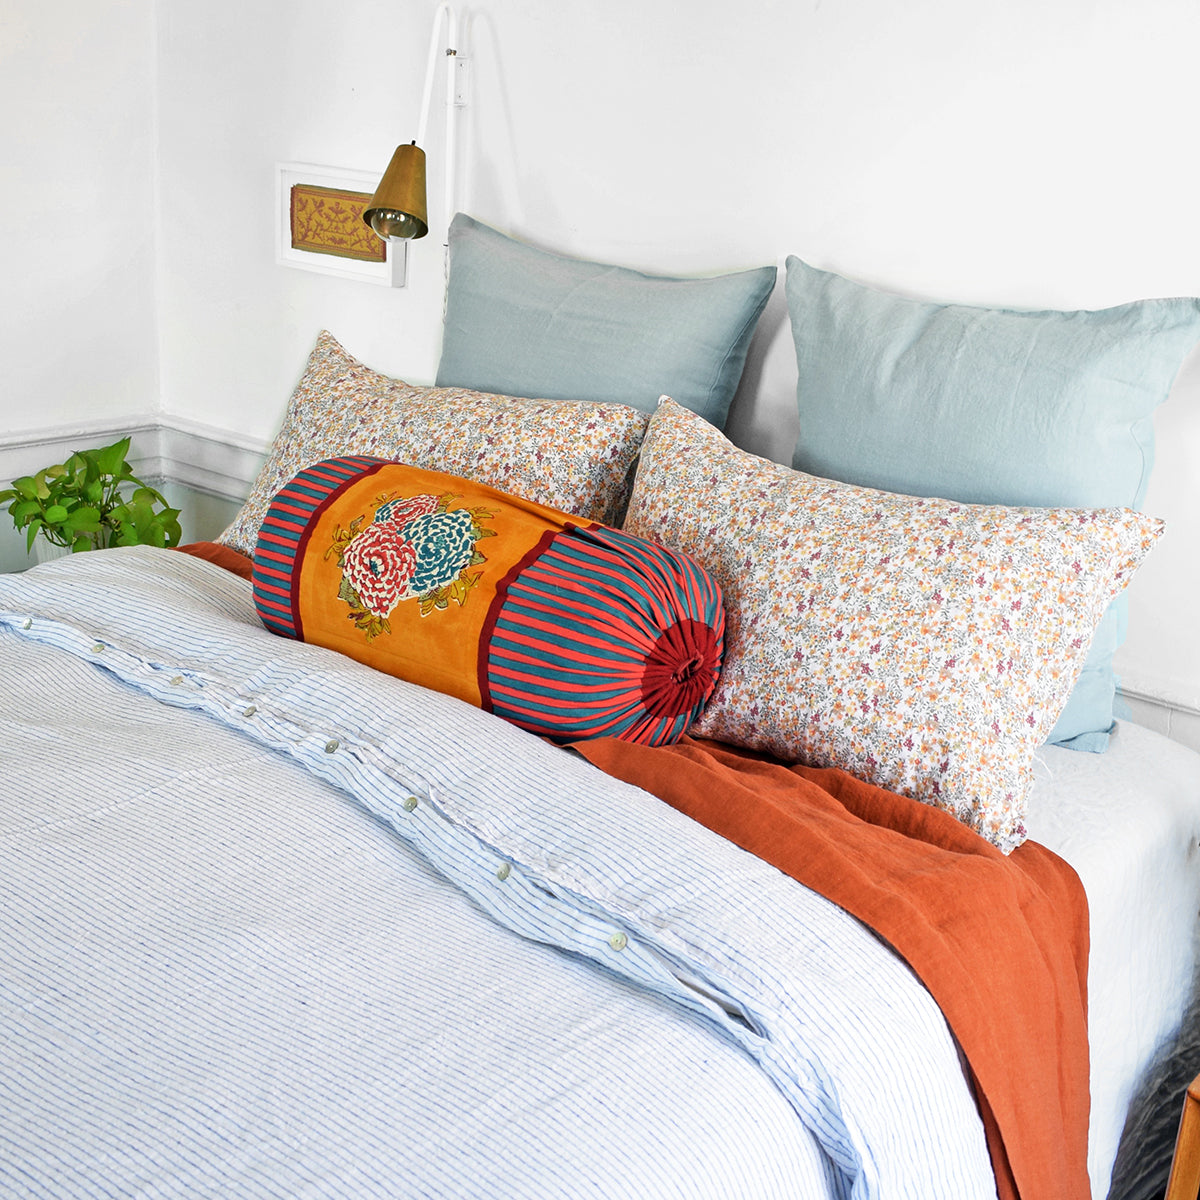 A Linge Particulier Linen Duvet in Atlantic Blue Stripe gives a white and blue pinstripe color to this duvet for a sky blue patterned and printed linen bedding look from Collyer's Mansion